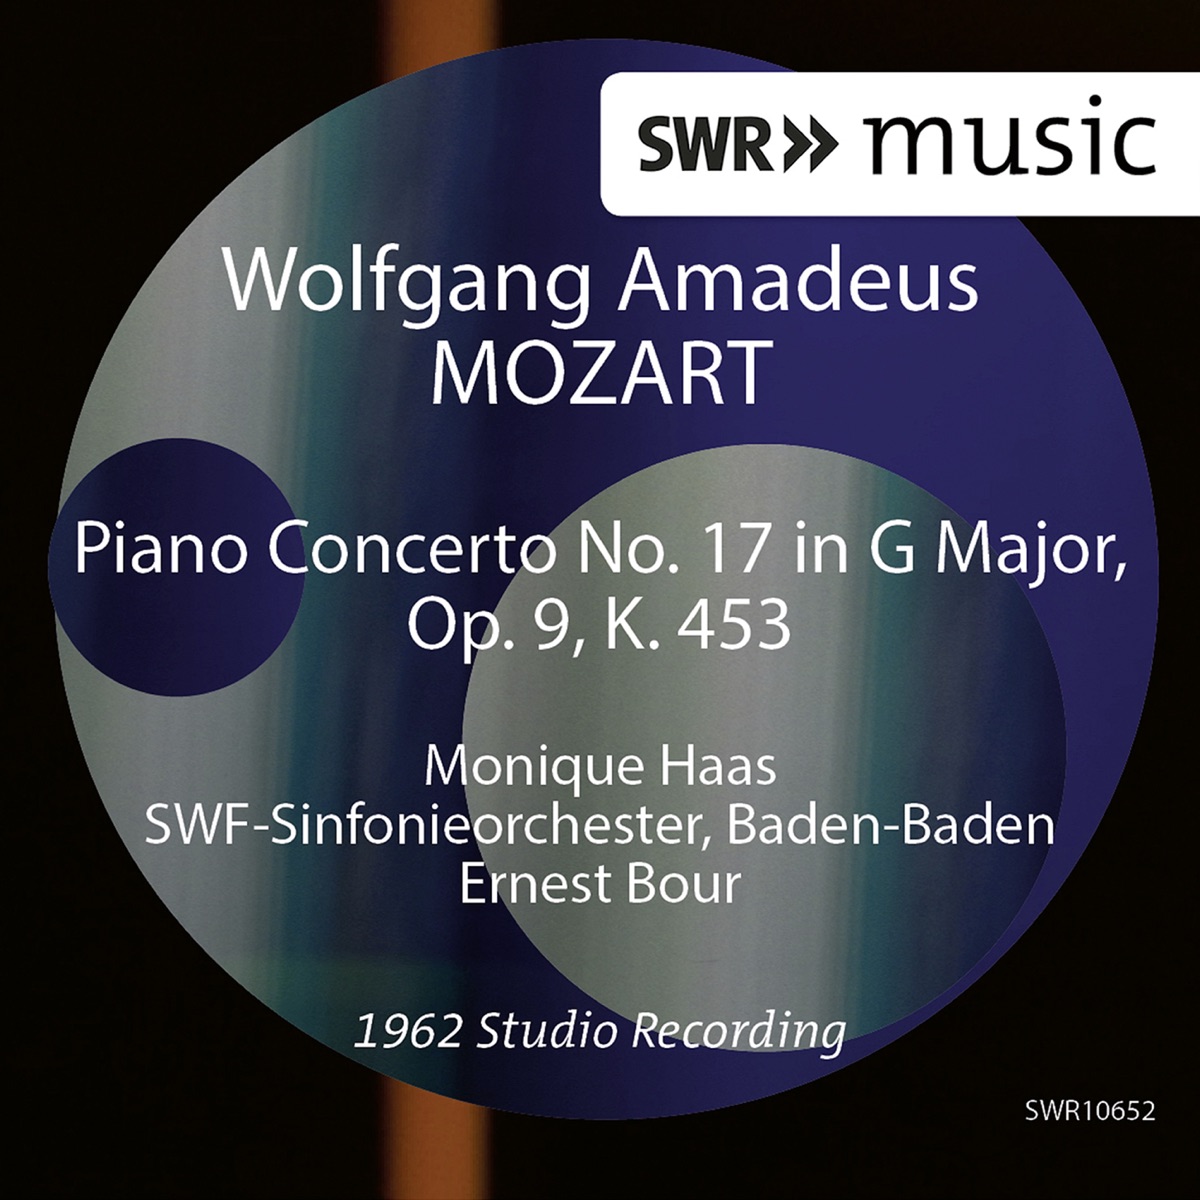 Mozart: Piano Concerto No. 17 in G Major, K. 453 by Monique Haas, Southwest  German Radio Symphony Orchestra & Ernest Bour on Apple Music